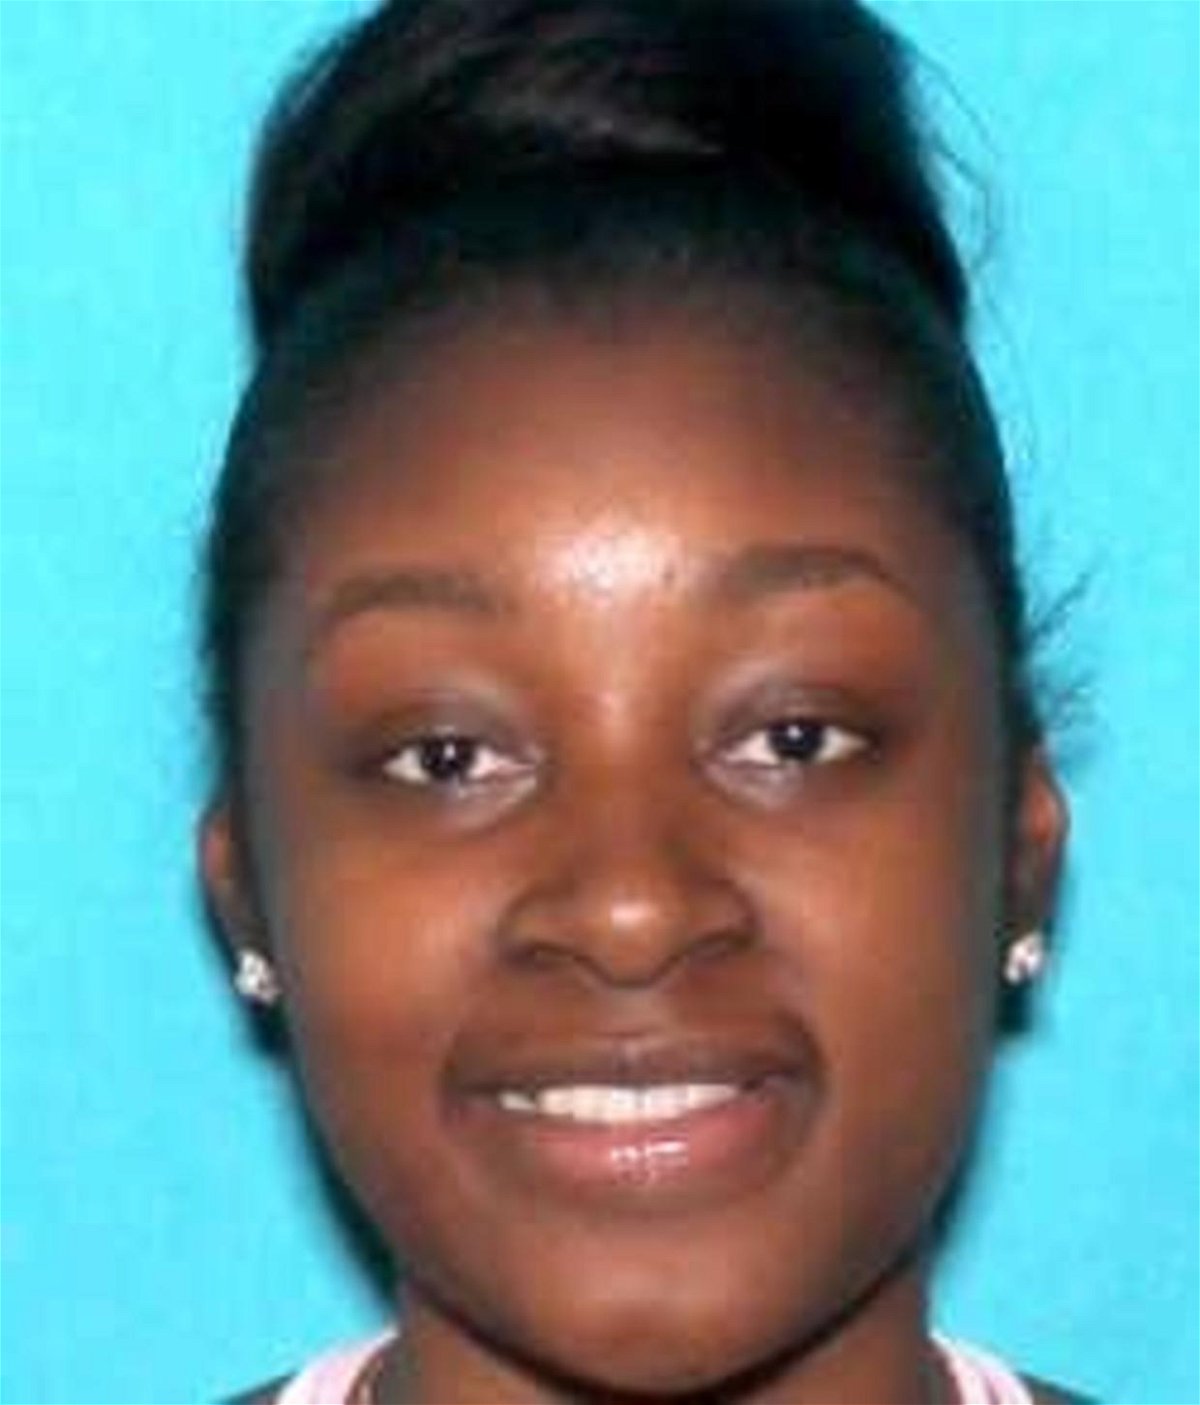 <i>DETROIT POLICE DEPARTMENT/WWJ</i><br/>A suspect is in custody in connection to the alleged kidnapping and murder of 29-year-old Patrice Wilson. Police sources told CBS News Detroit Monday morning that a suspect is now in custody. The identity of the suspect arrested has not been released.